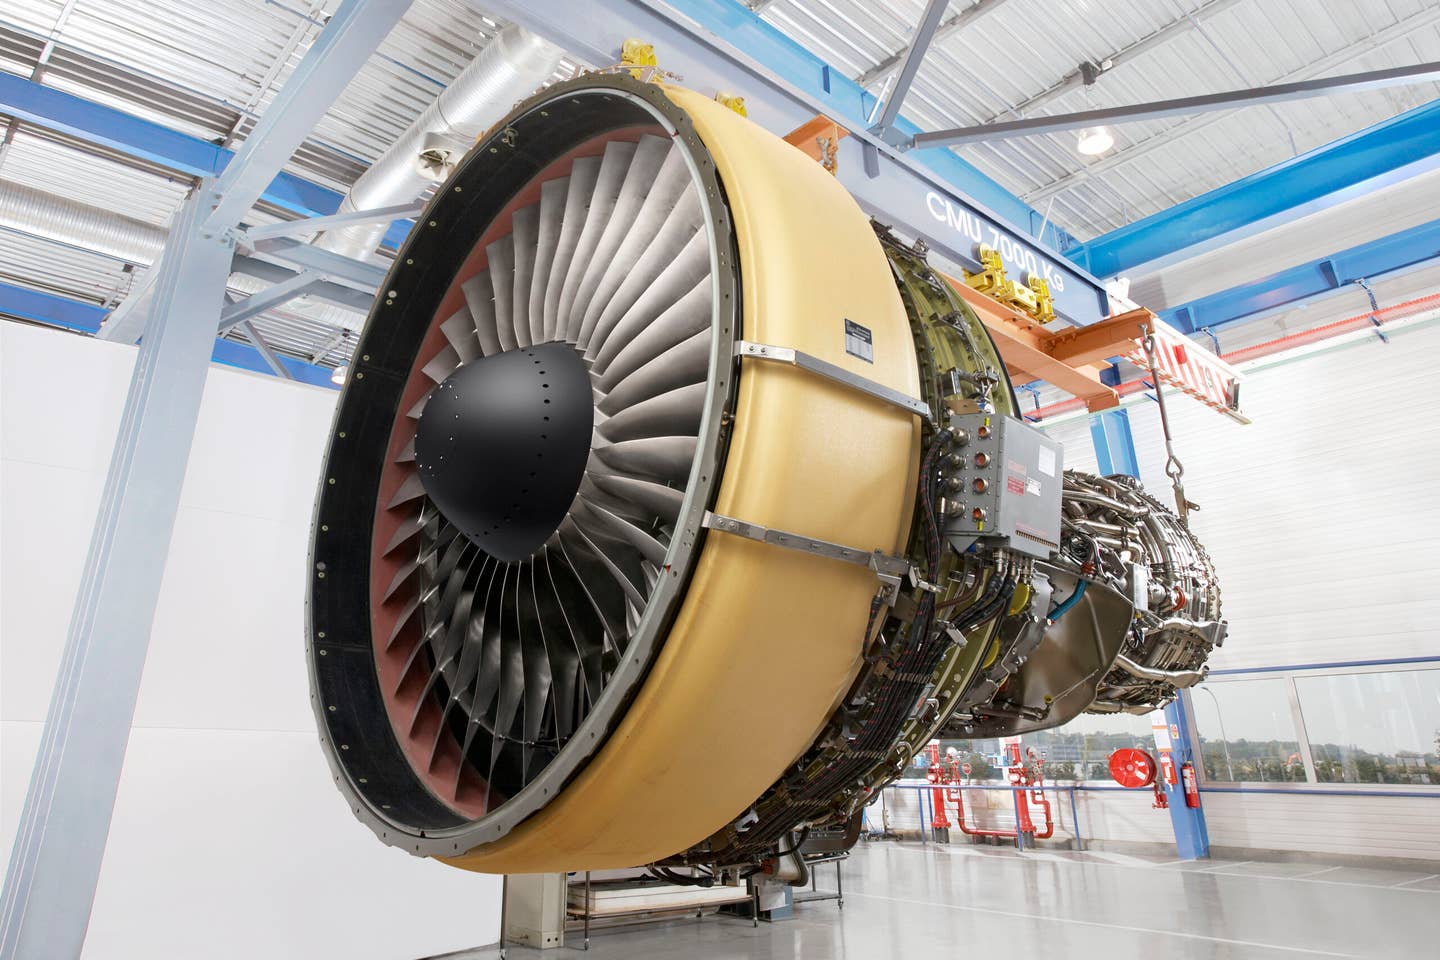 &nbsp;Rated at 72,000 pounds thrust, the CF6-80E1A3 is the highest-thrust CF6 engine offered to date. <em>GE Aerospace</em><br>